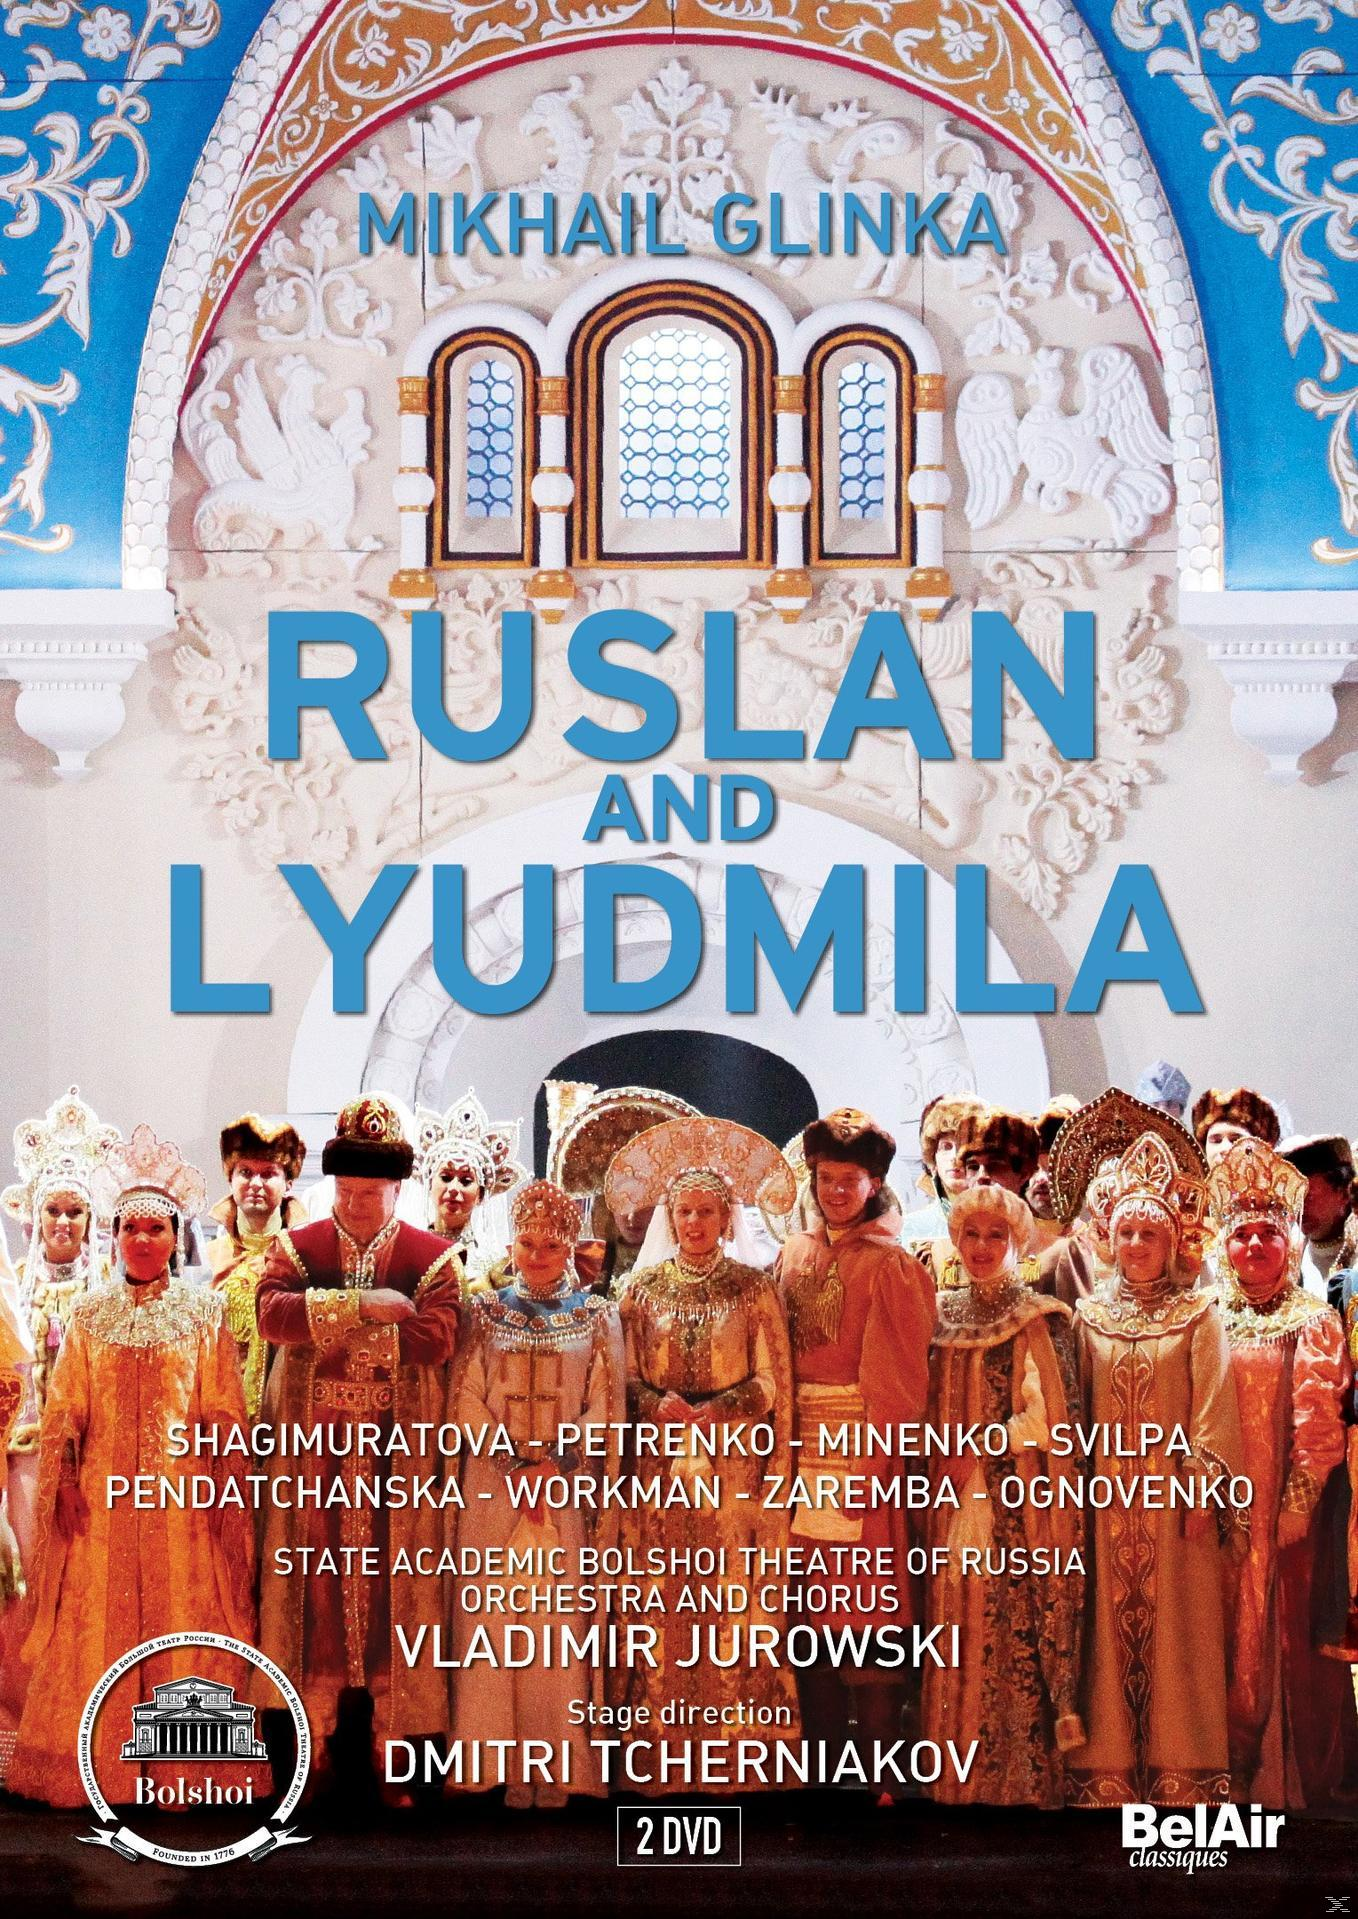 VARIOUS, Orchestra Academic And Ruslan Chorus Of (DVD) Ludmila Russia Theater Of State - - Und The Bolchoi